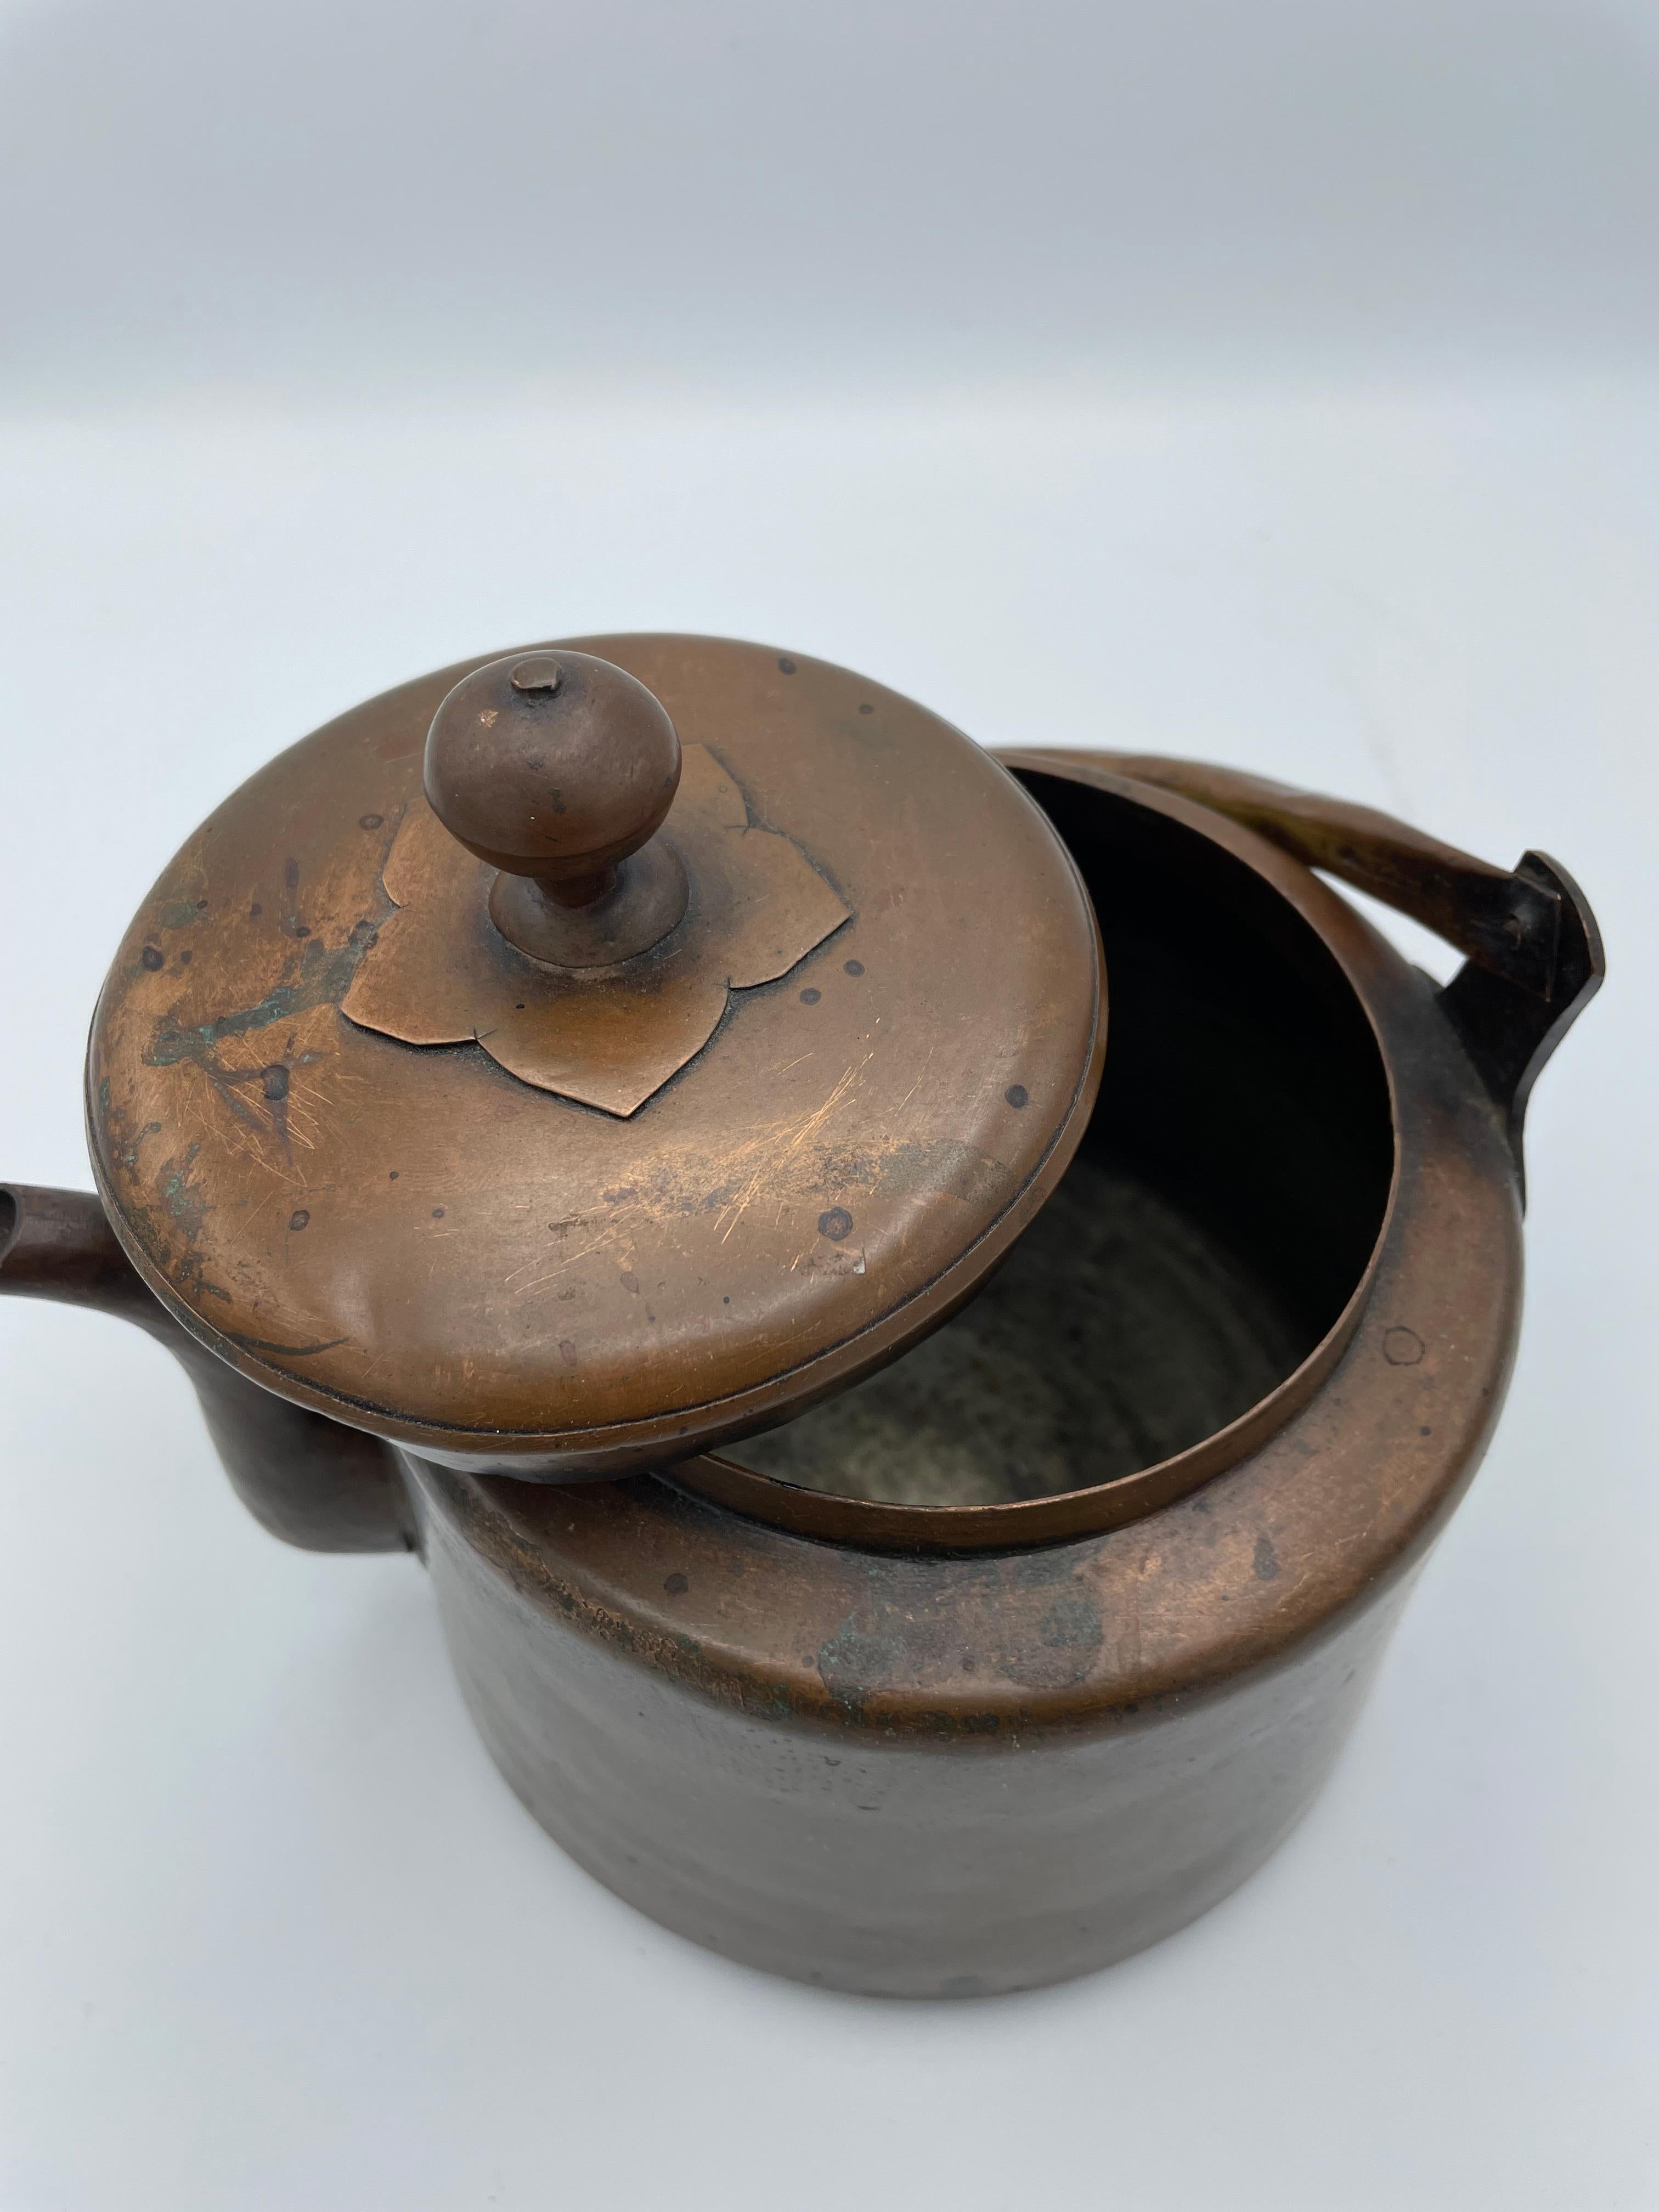 Antique Japanese Pitcher 'Yakan' with Copper 1920s for Tea Ceremony For Sale 3